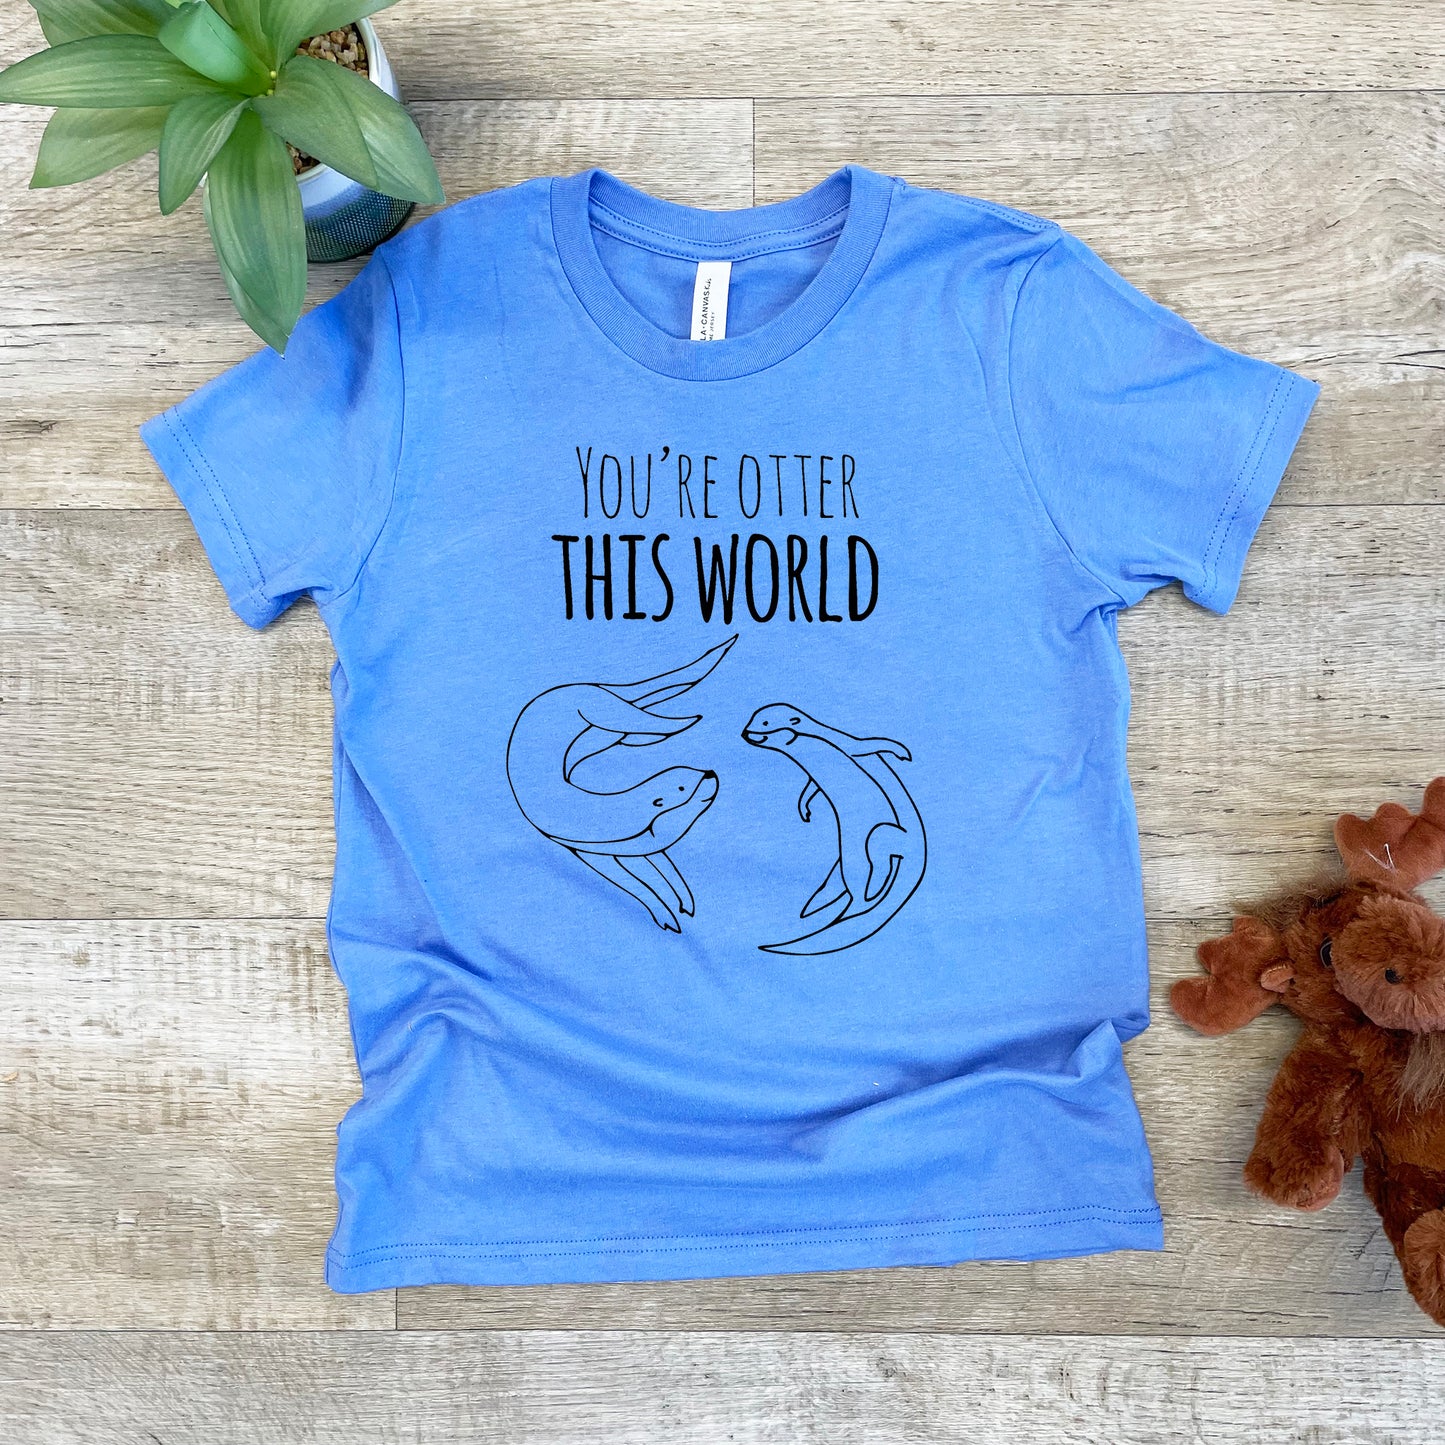 You're Otter This World - Kid's Tee - Columbia Blue or Lavender